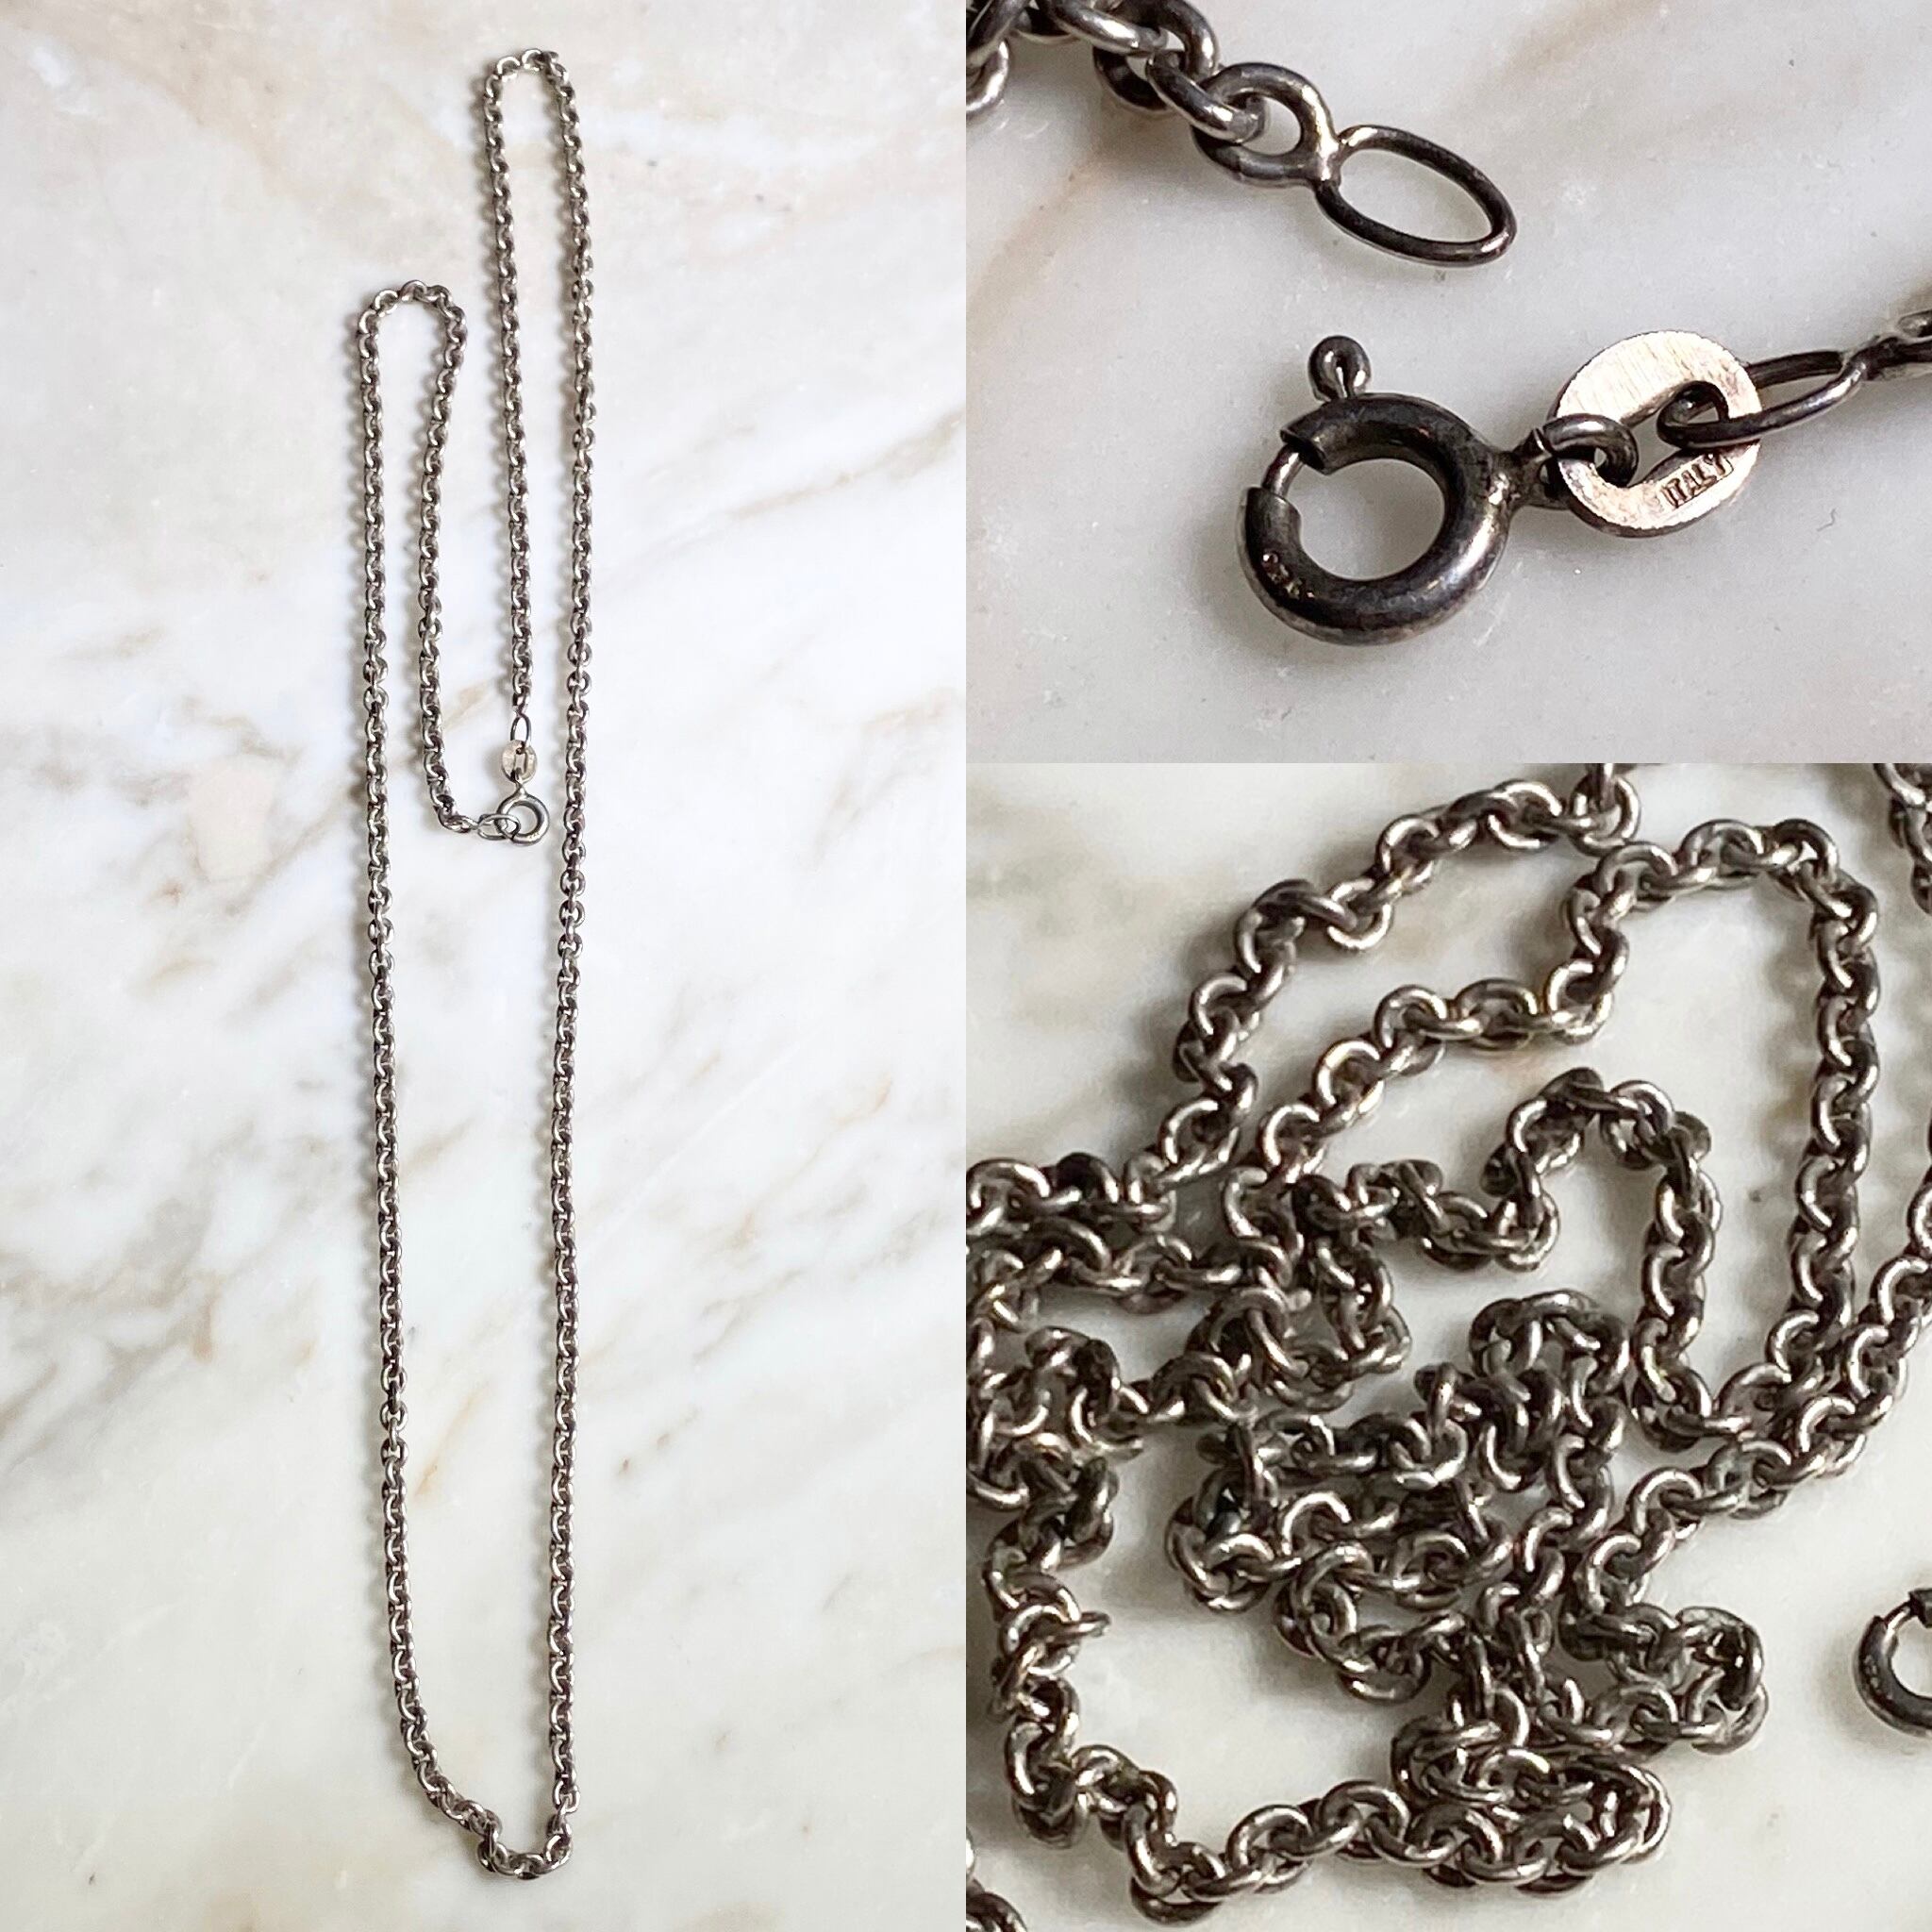 Vintage Italian Silver Chain Necklace